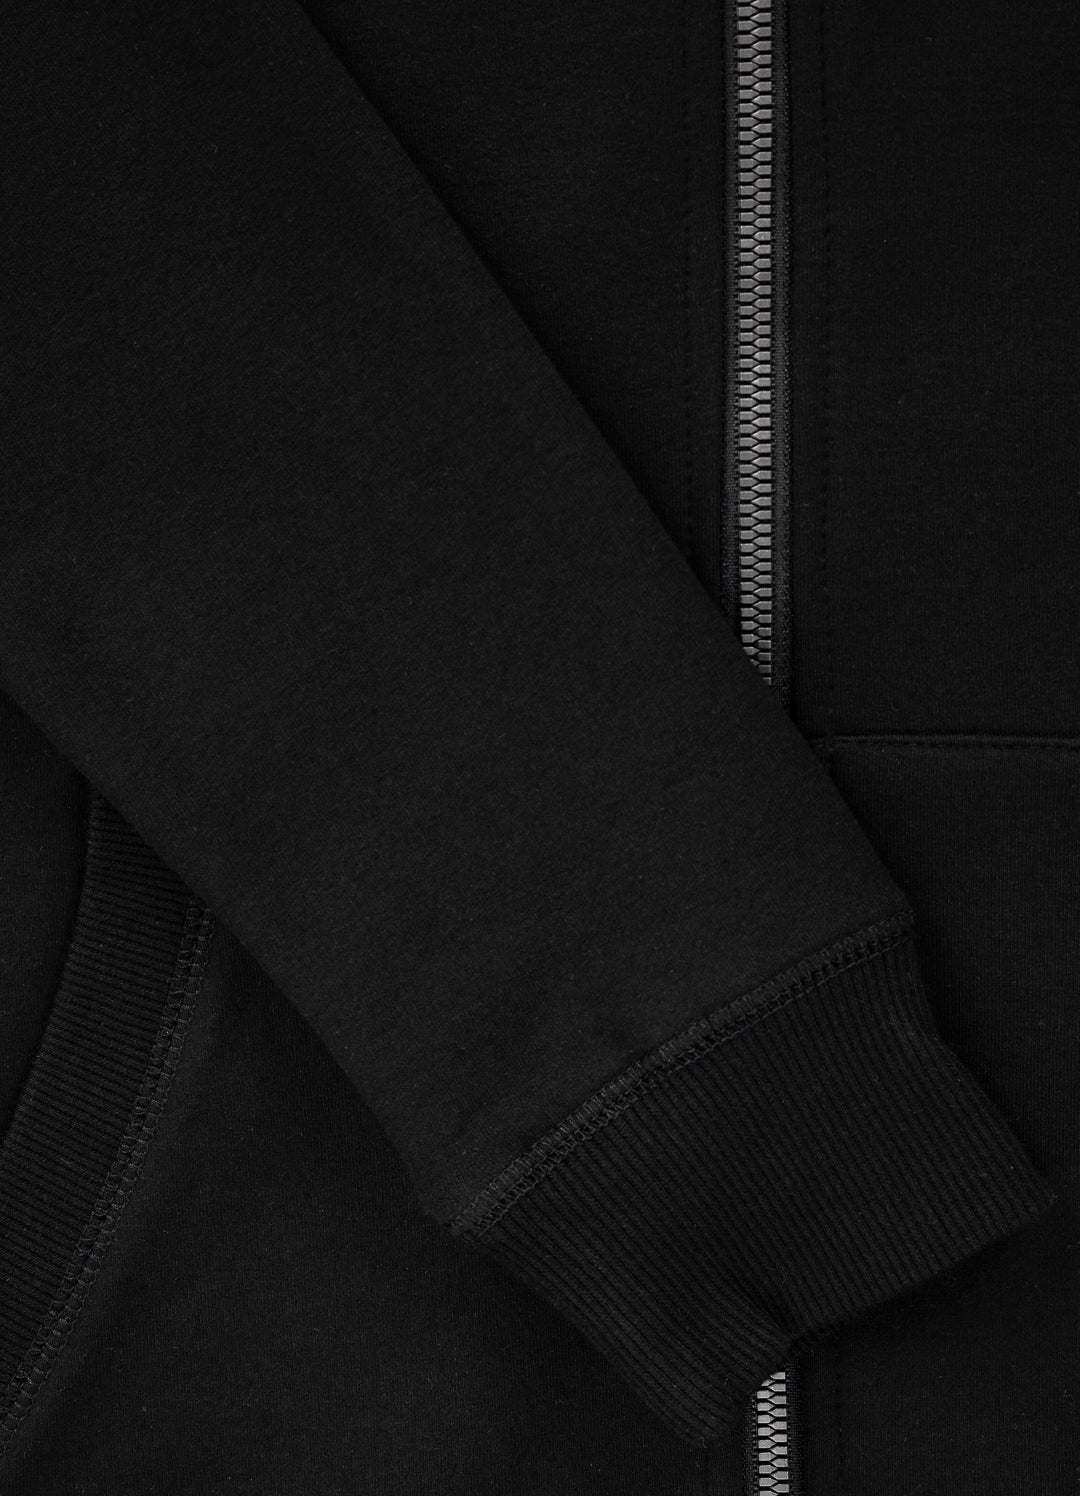 DAISY French Terry Black hooded zip.